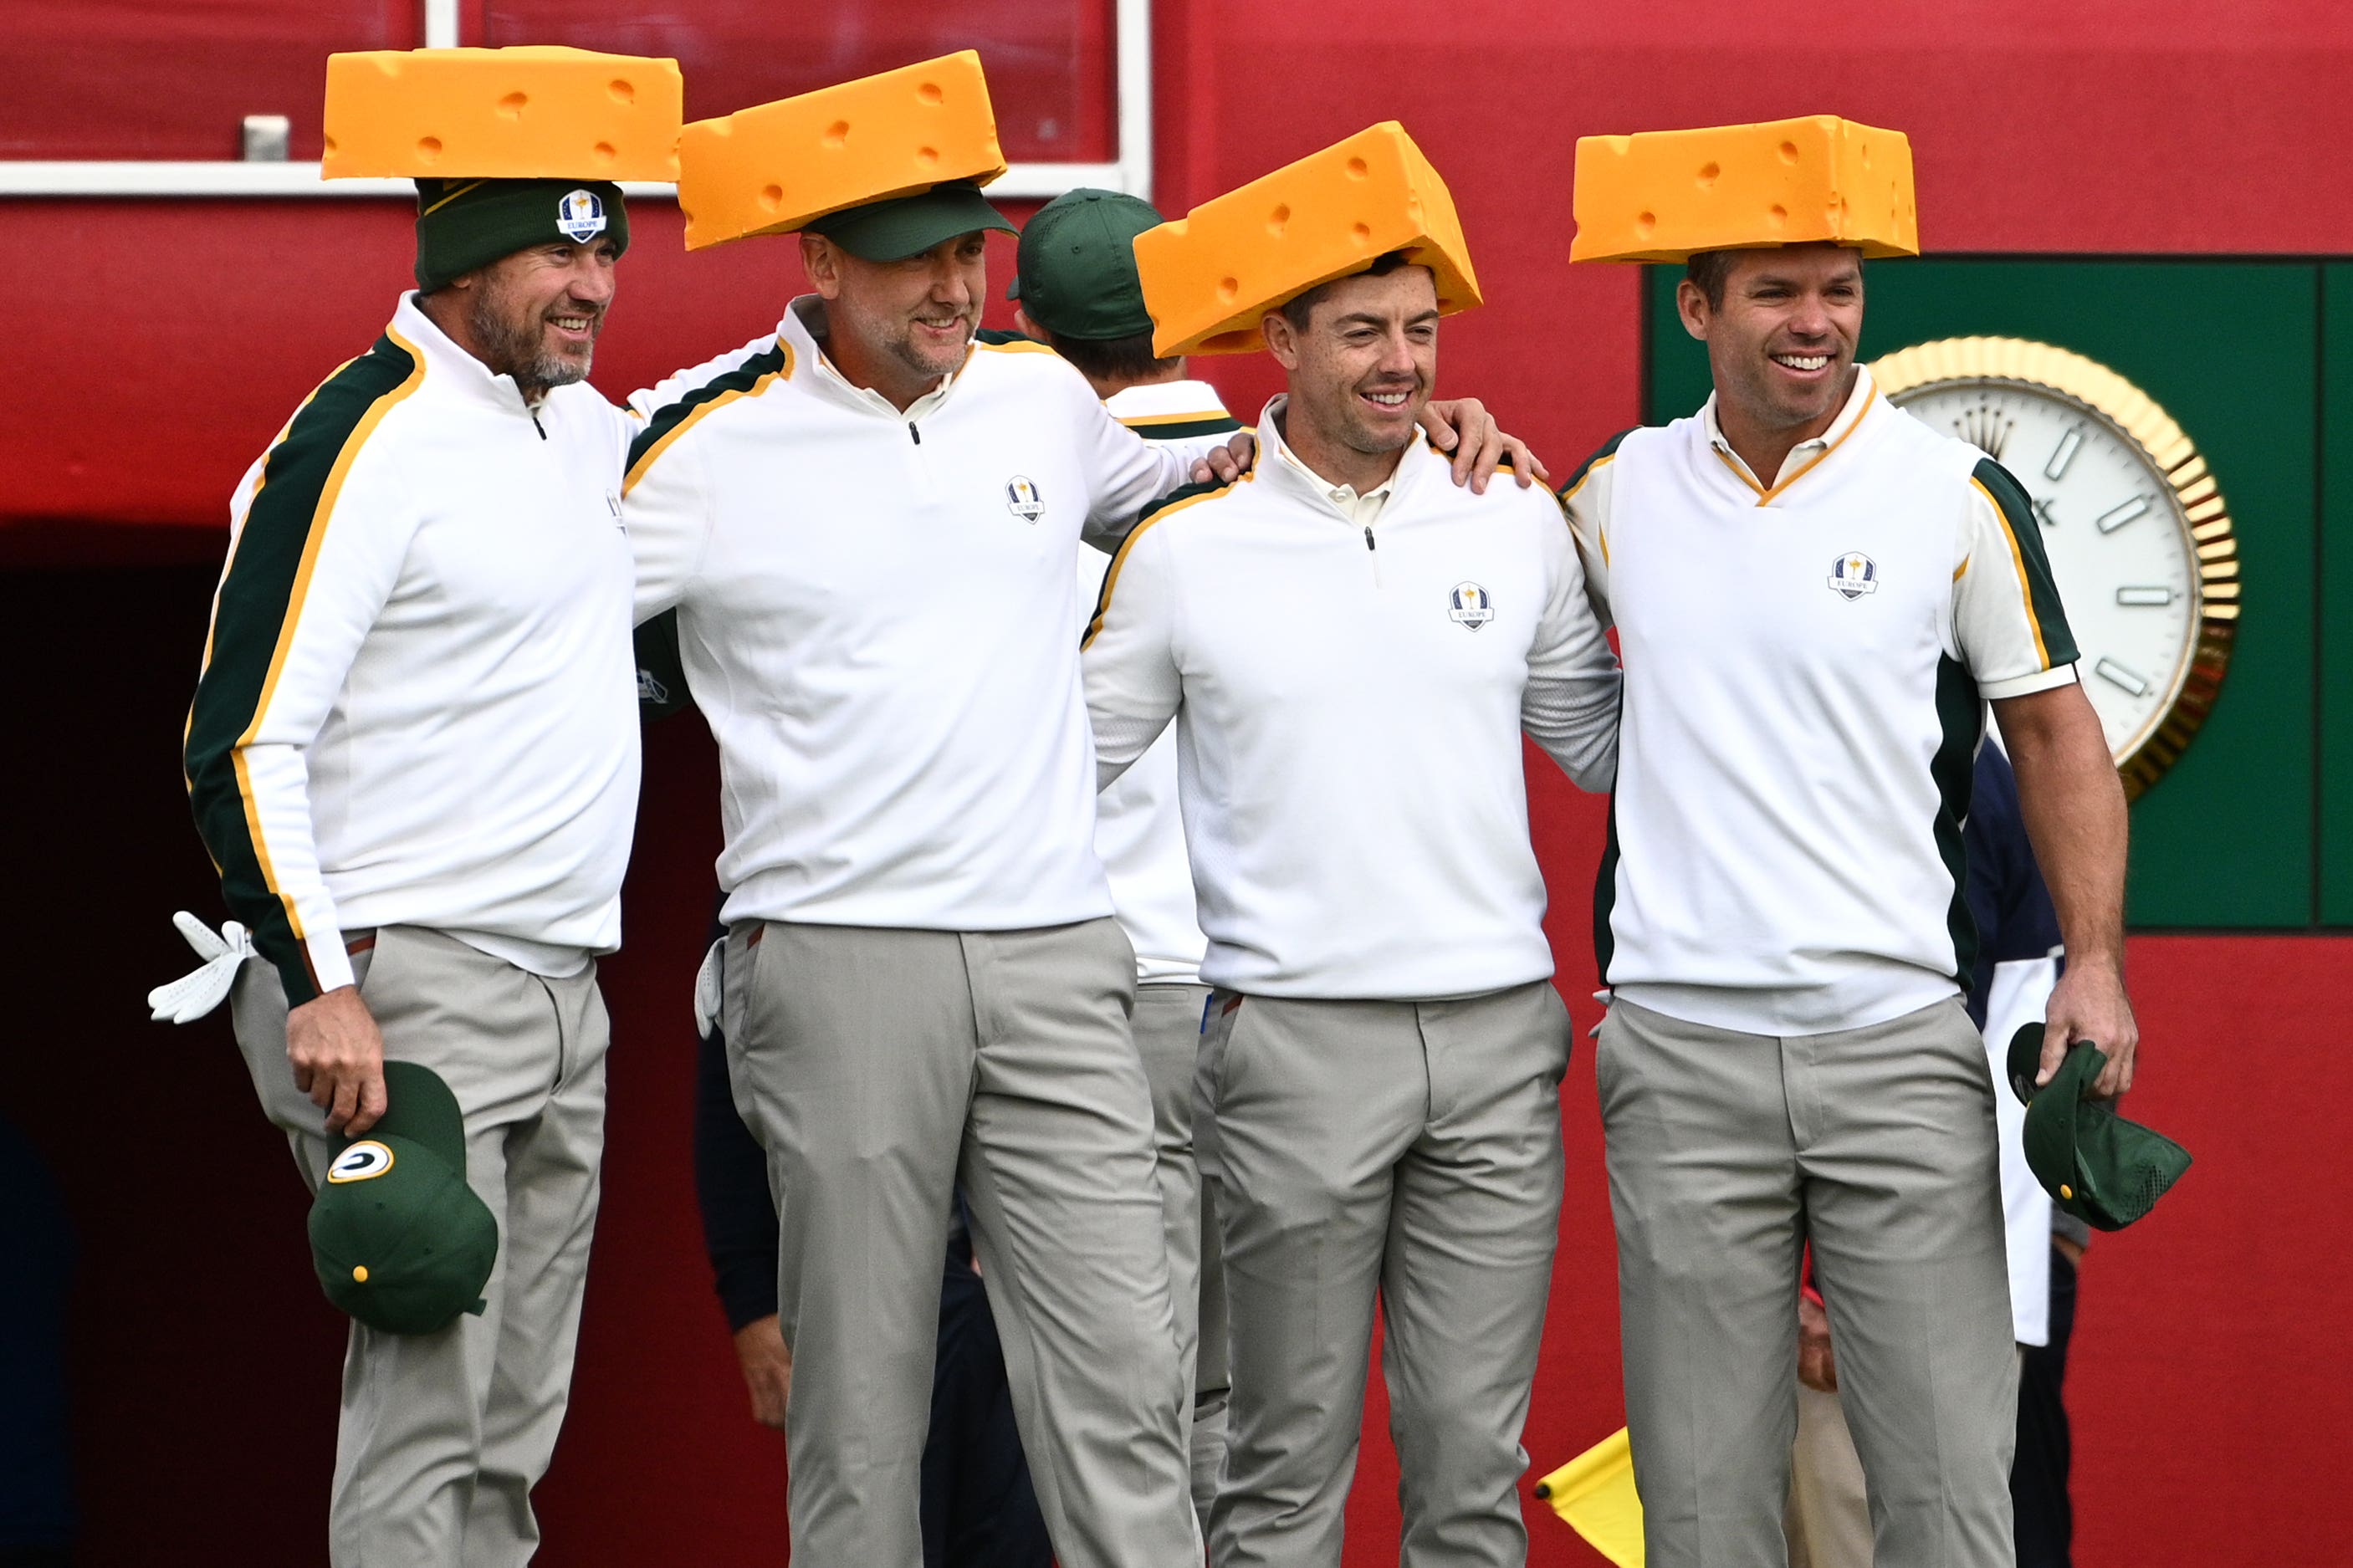 Europe’s Lee Westwood, Ian Poulter, Rory McIlroy and Paul Casey (left-right) arrive on the first tee wearing Green Bay Packers Cheesehead hats in practice ahead of the Ryder Cup (PA Archive)